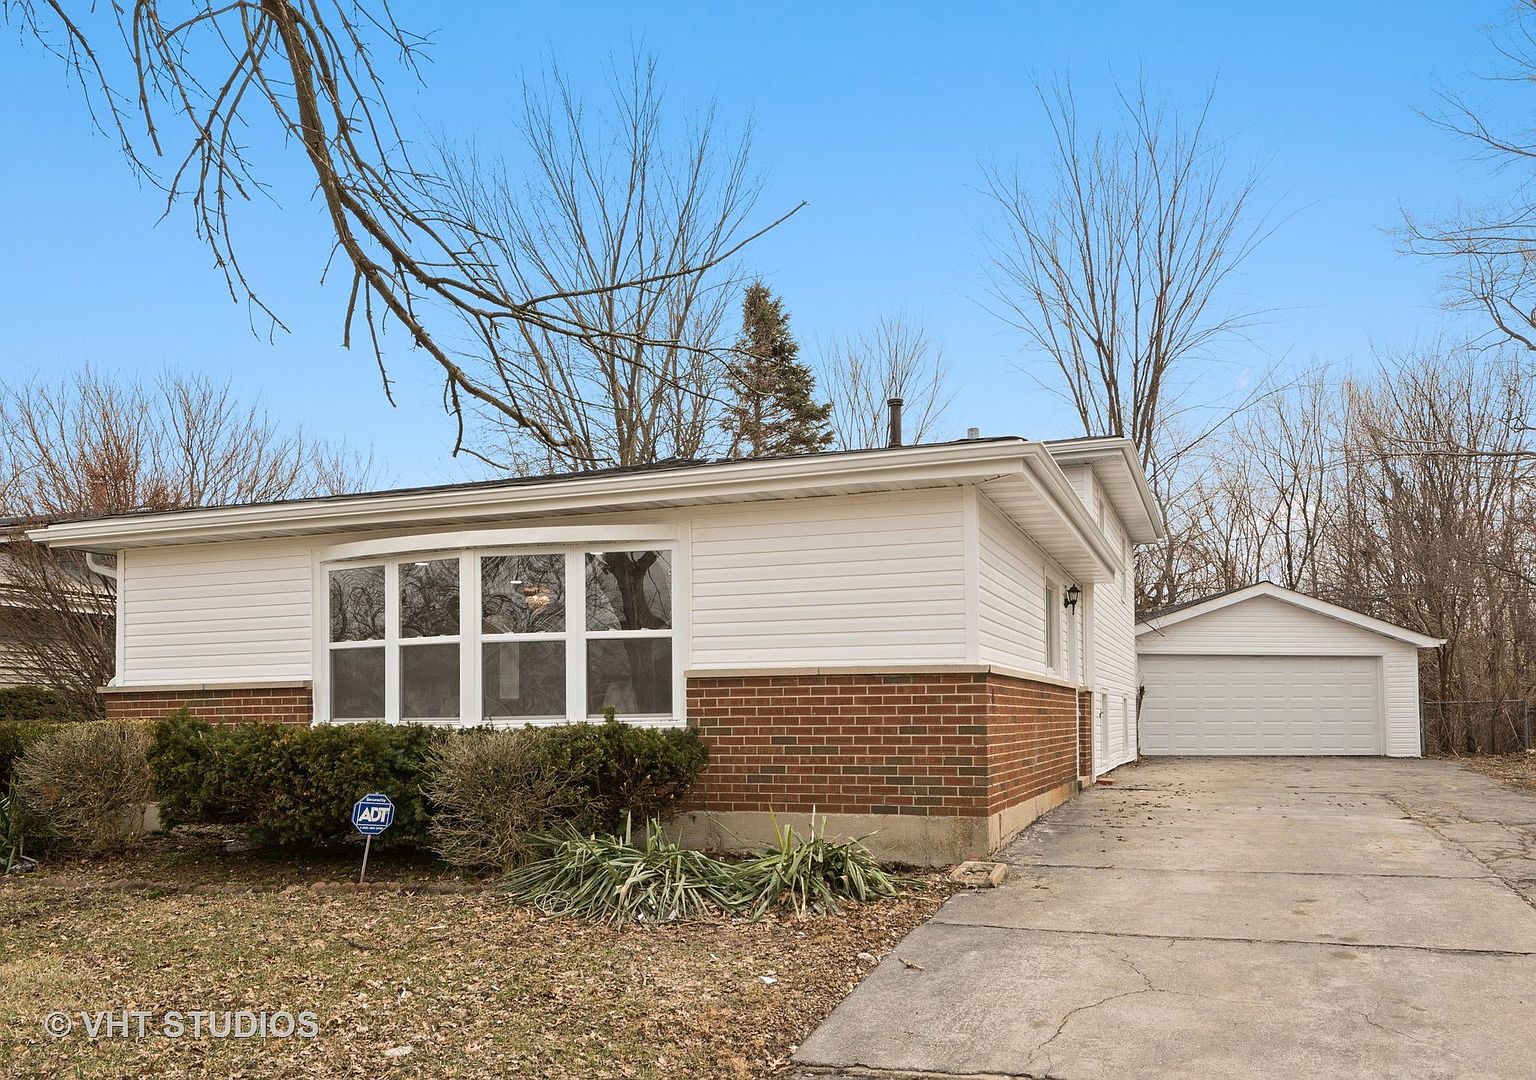 227 Lee St, Park Forest, IL 60466 | Zillow